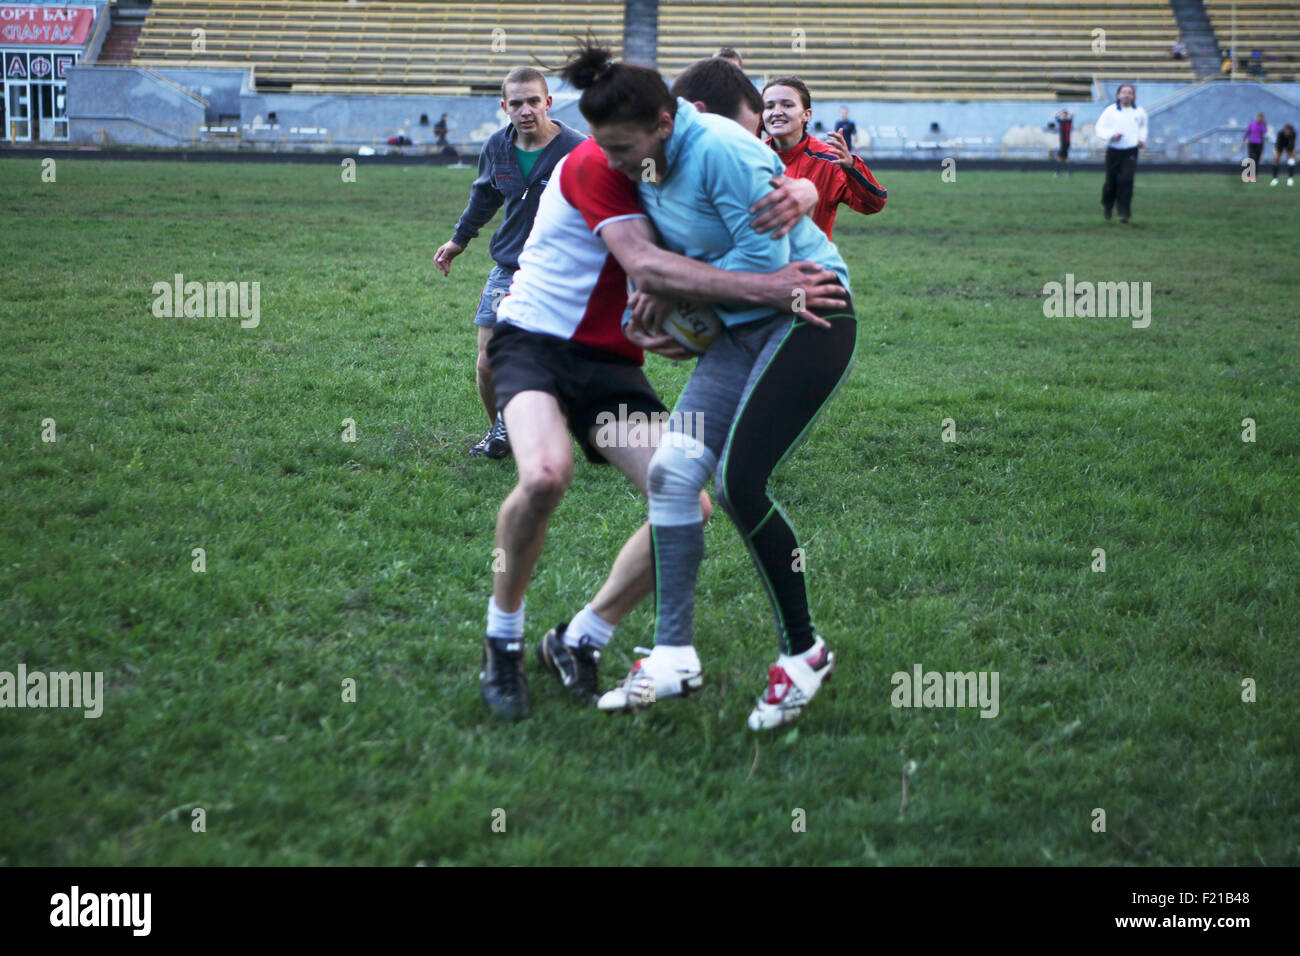 Kiev, Ukraine. 9th September, 2015. On 9 September Ukraine's Rugby squad (Female 18-) finishes training camp with playing male team from Eldorado school in Kiev on Spartak stad field. Pictured male player grabs young female opponent with a ball to stop her while her team mates hurry to help her Stock Photo